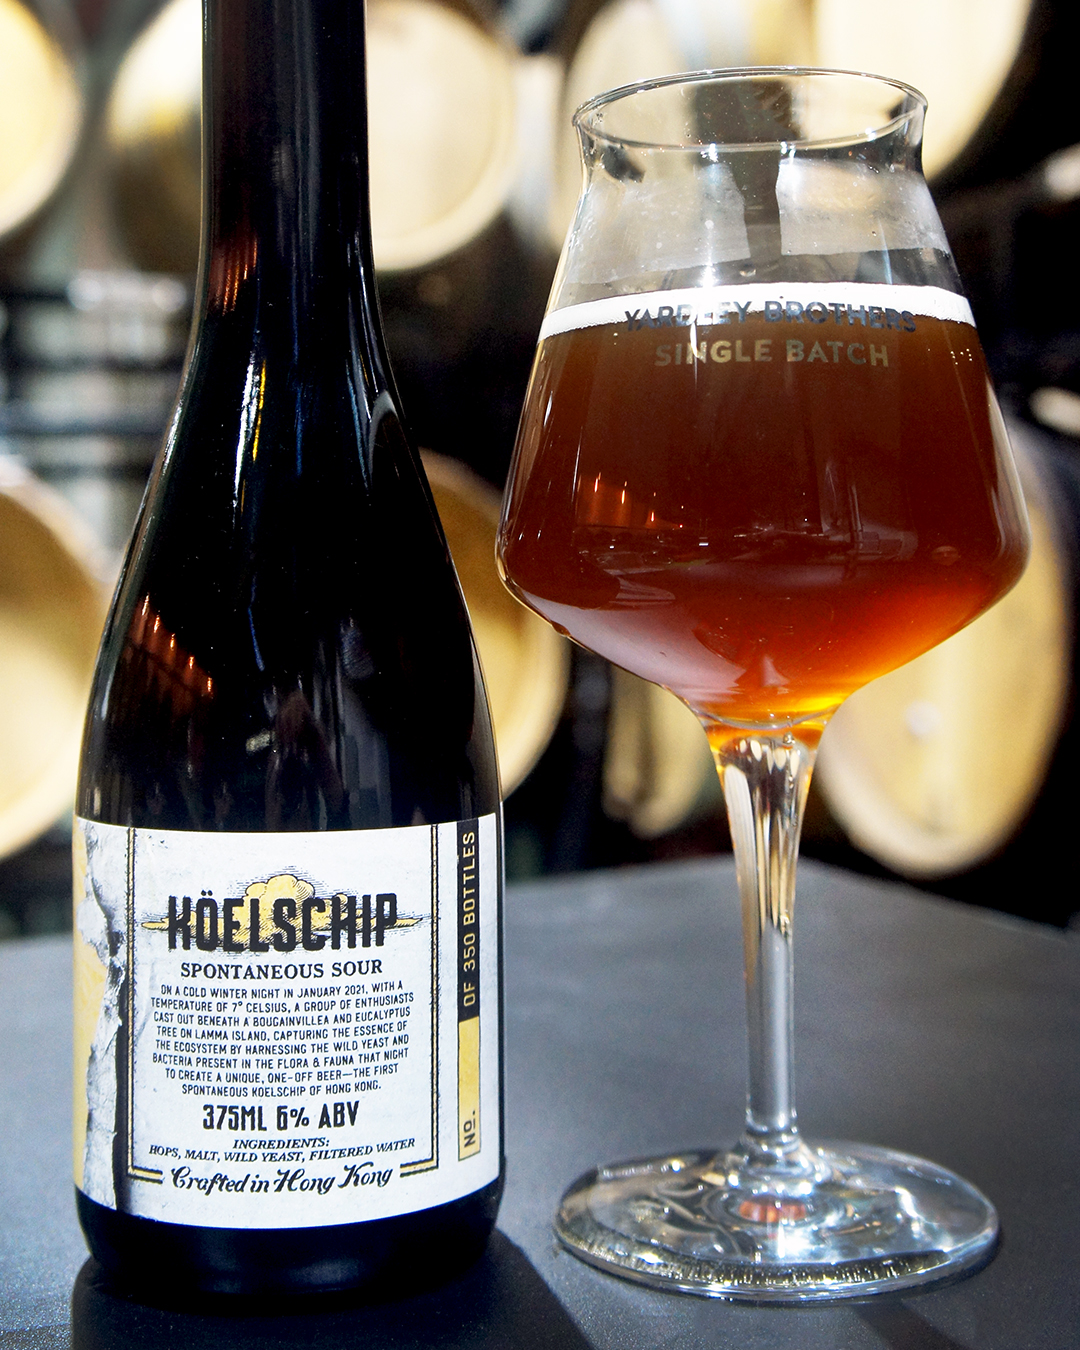 If you have a hankering for top-notch craft beer you're in luck with the ultra-limited release of the first commercially-brewed Yardley Brothers Koëlschip spontaneously fermented ale.